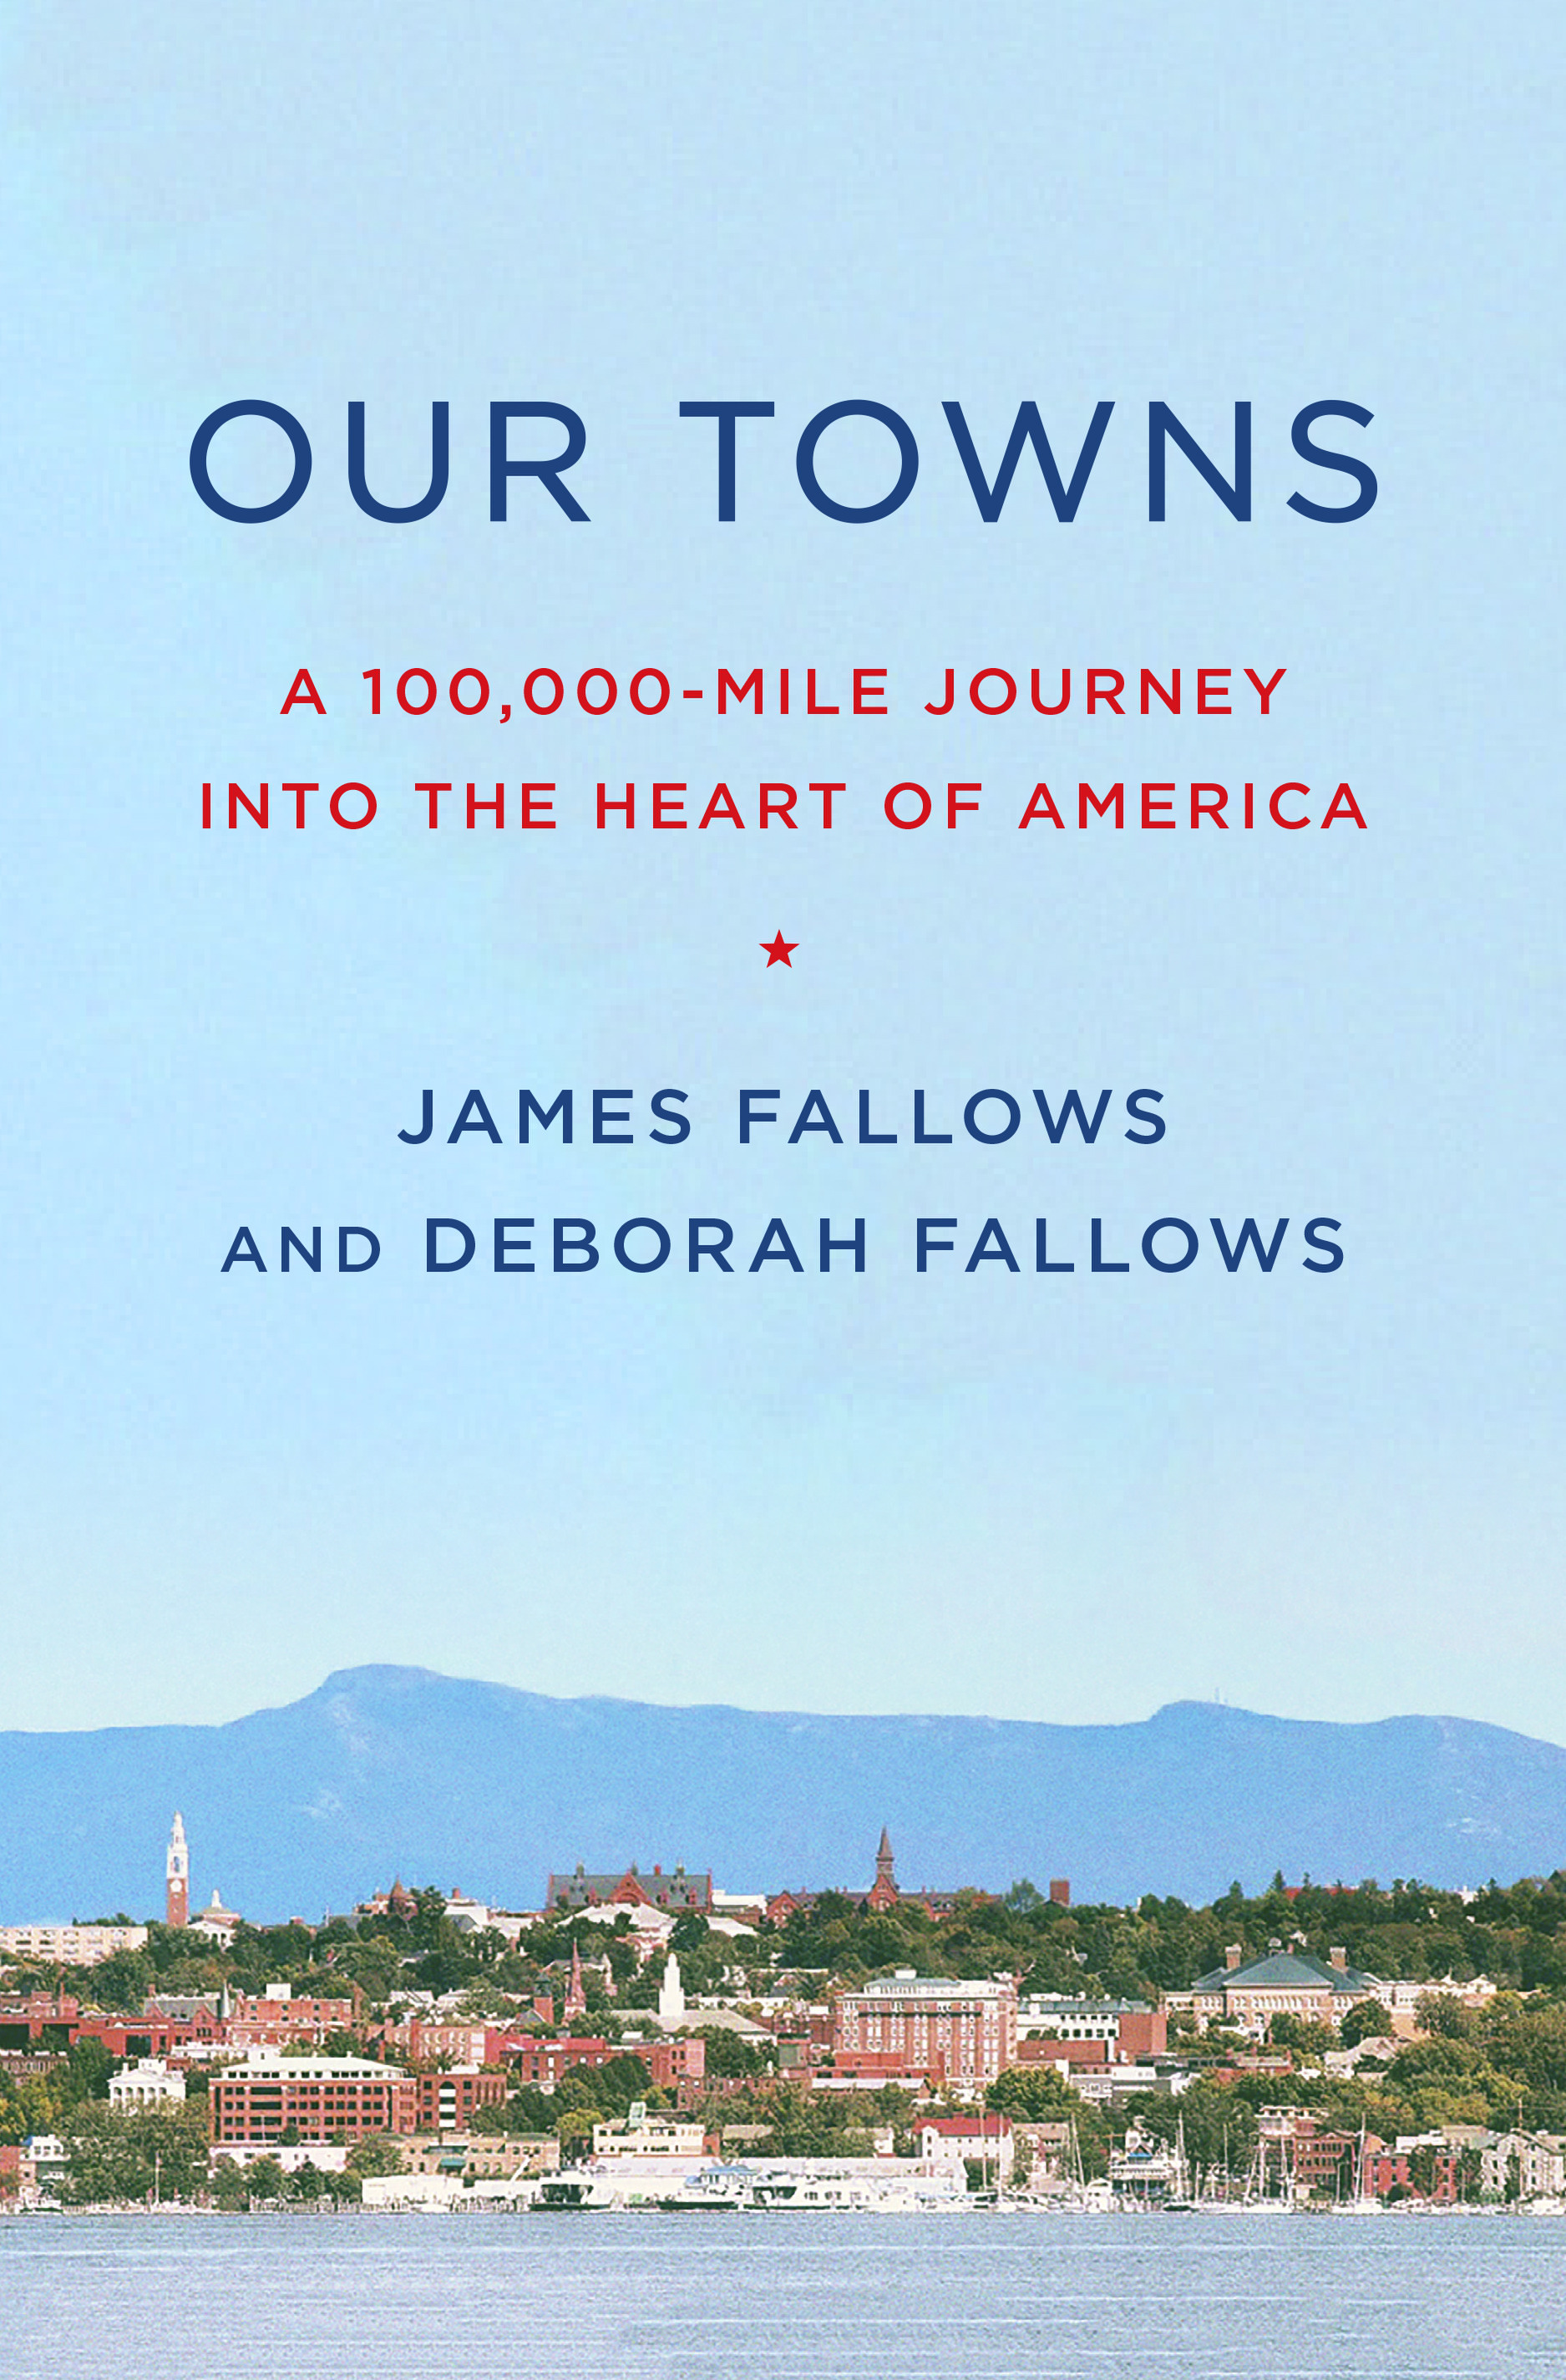 ourtowns book cover